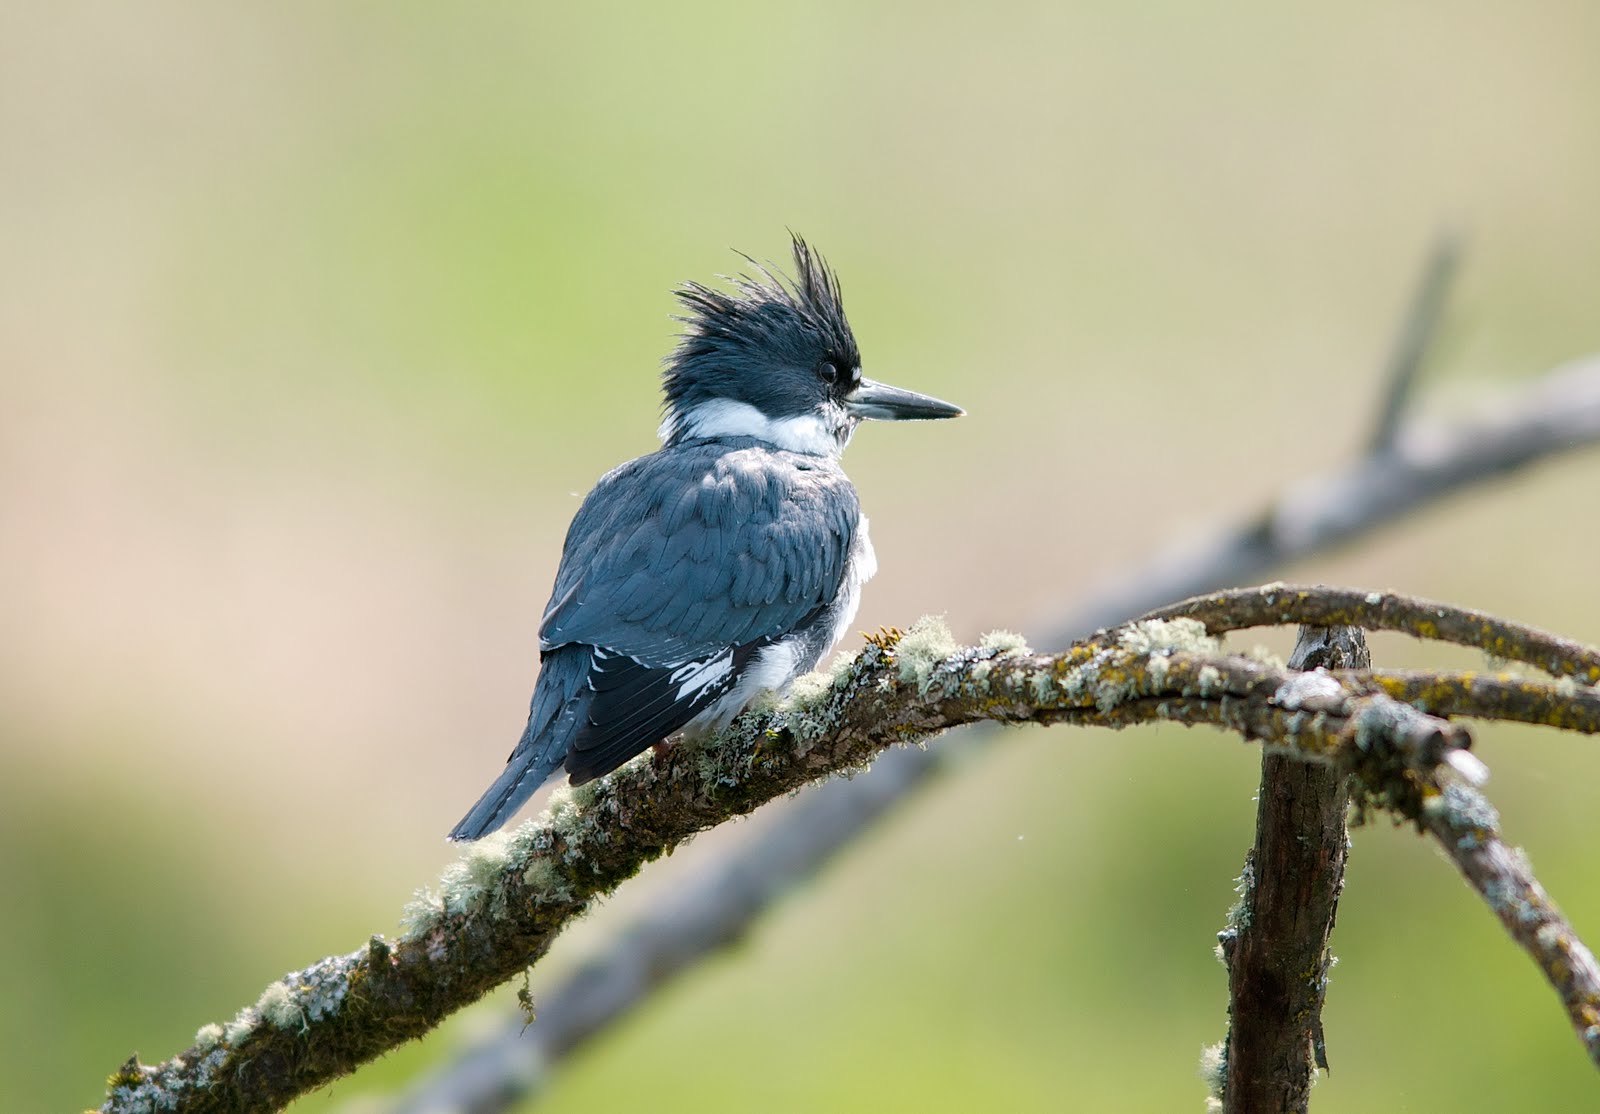 ... old pictures and ran across the belted kingfisher i shot from the bird